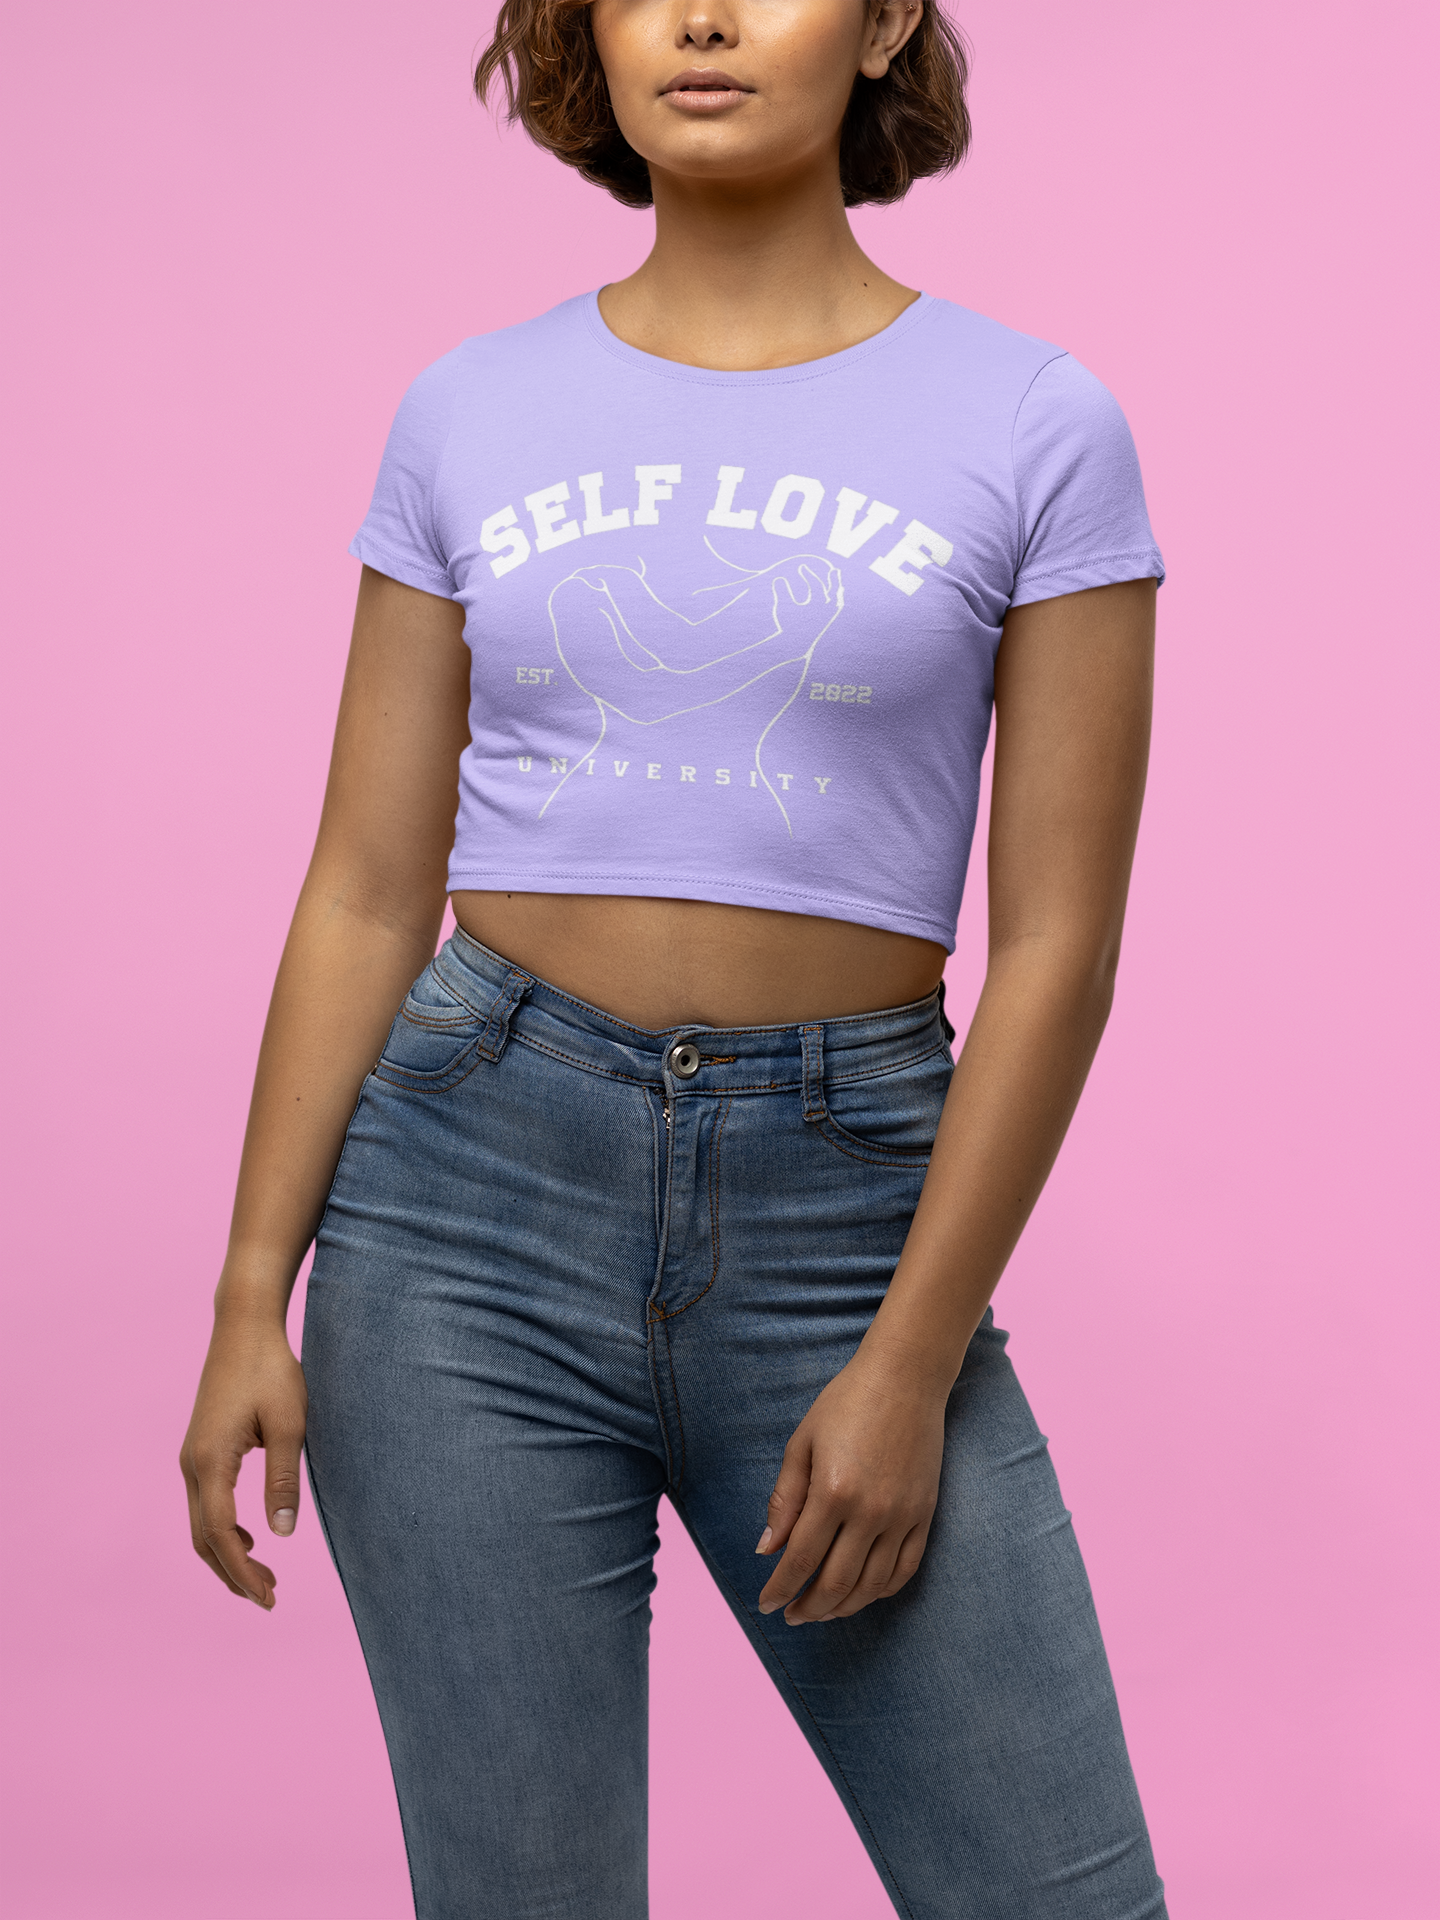 THE FITTED CROP TOP.